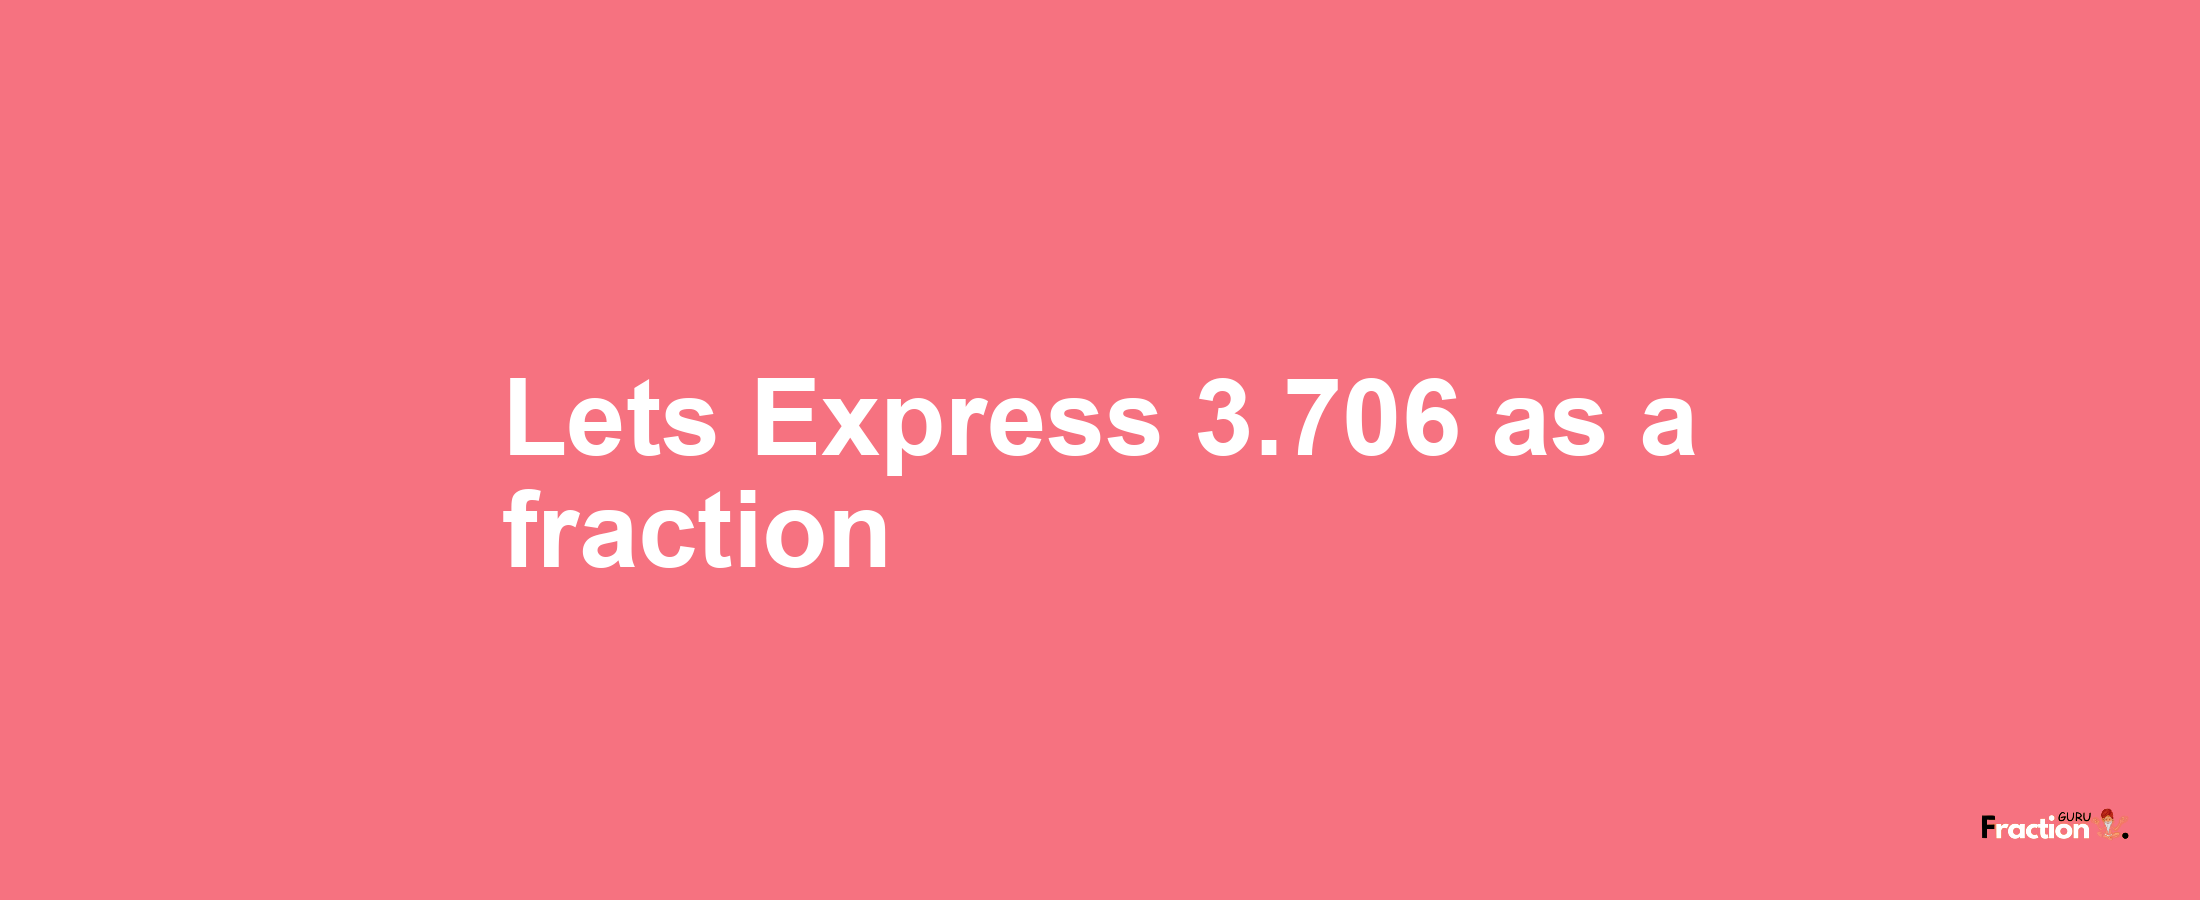 Lets Express 3.706 as afraction